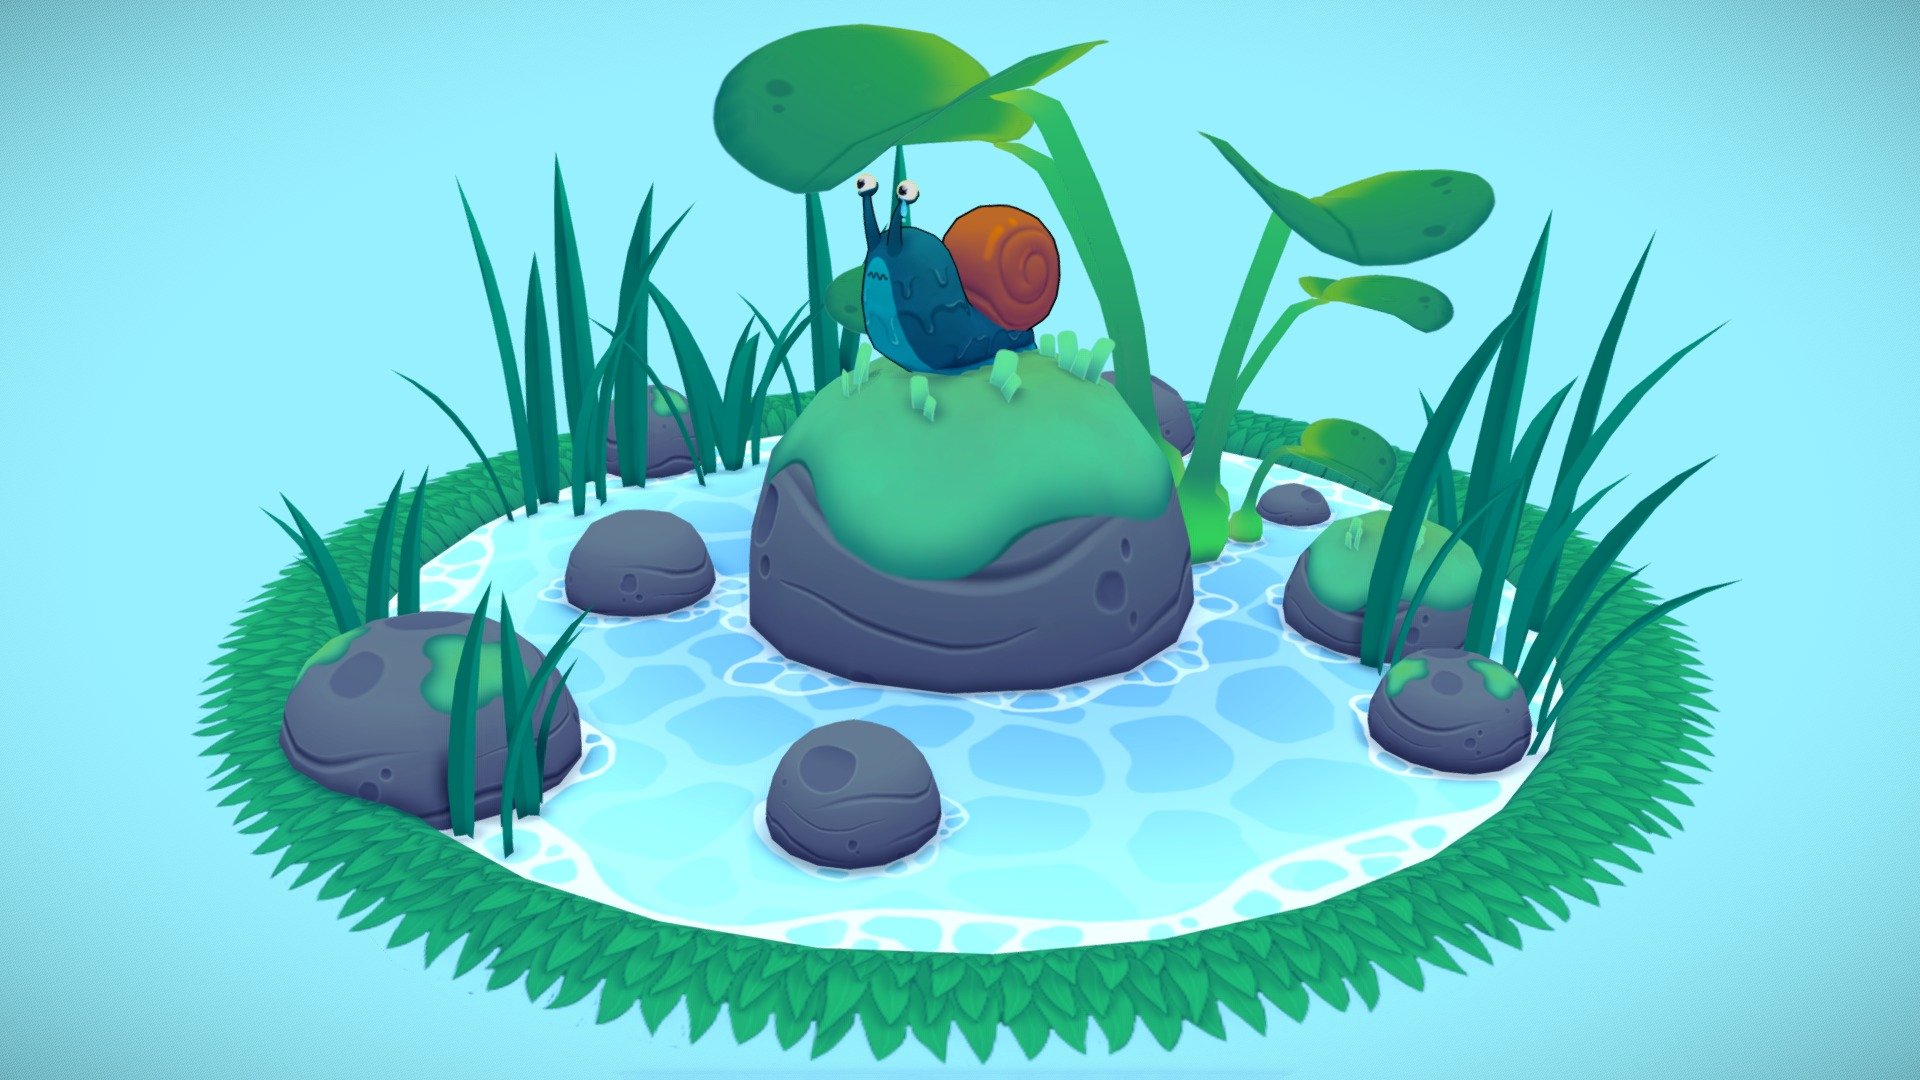 A sad little snail, maybe he has an interesting backstory that we will never know

Modeled in blender

If you like the model and want to support me with a coffee you can stop by my ko-fi

☕☕☕☕ https://ko-fi.com/ergoni ☕☕☕☕ - Sad Snail - Download Free 3D model by Ergoni 3d model